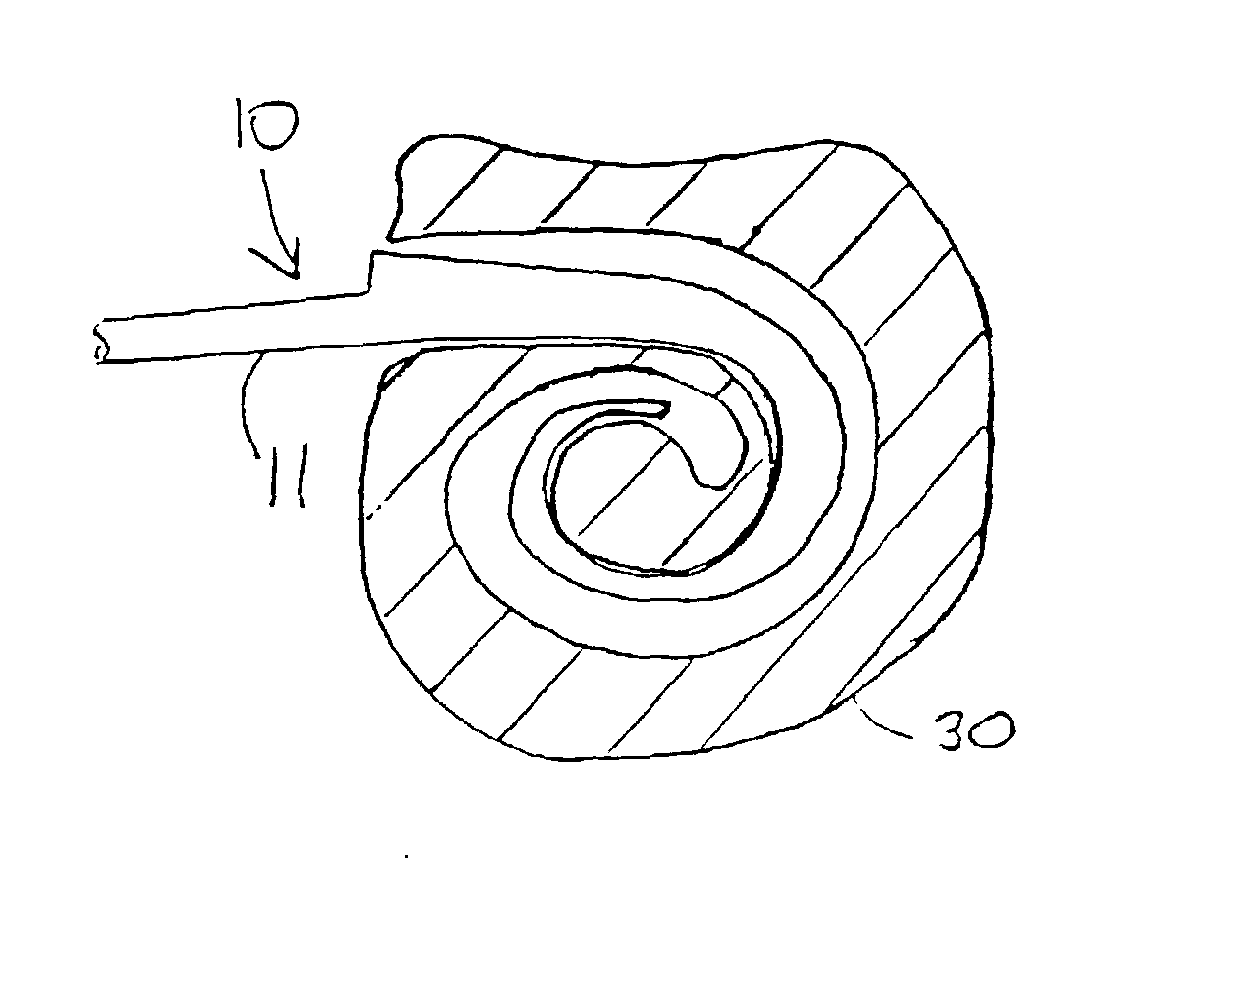 Double stylet insertion tool for a cochlear implant electrode array